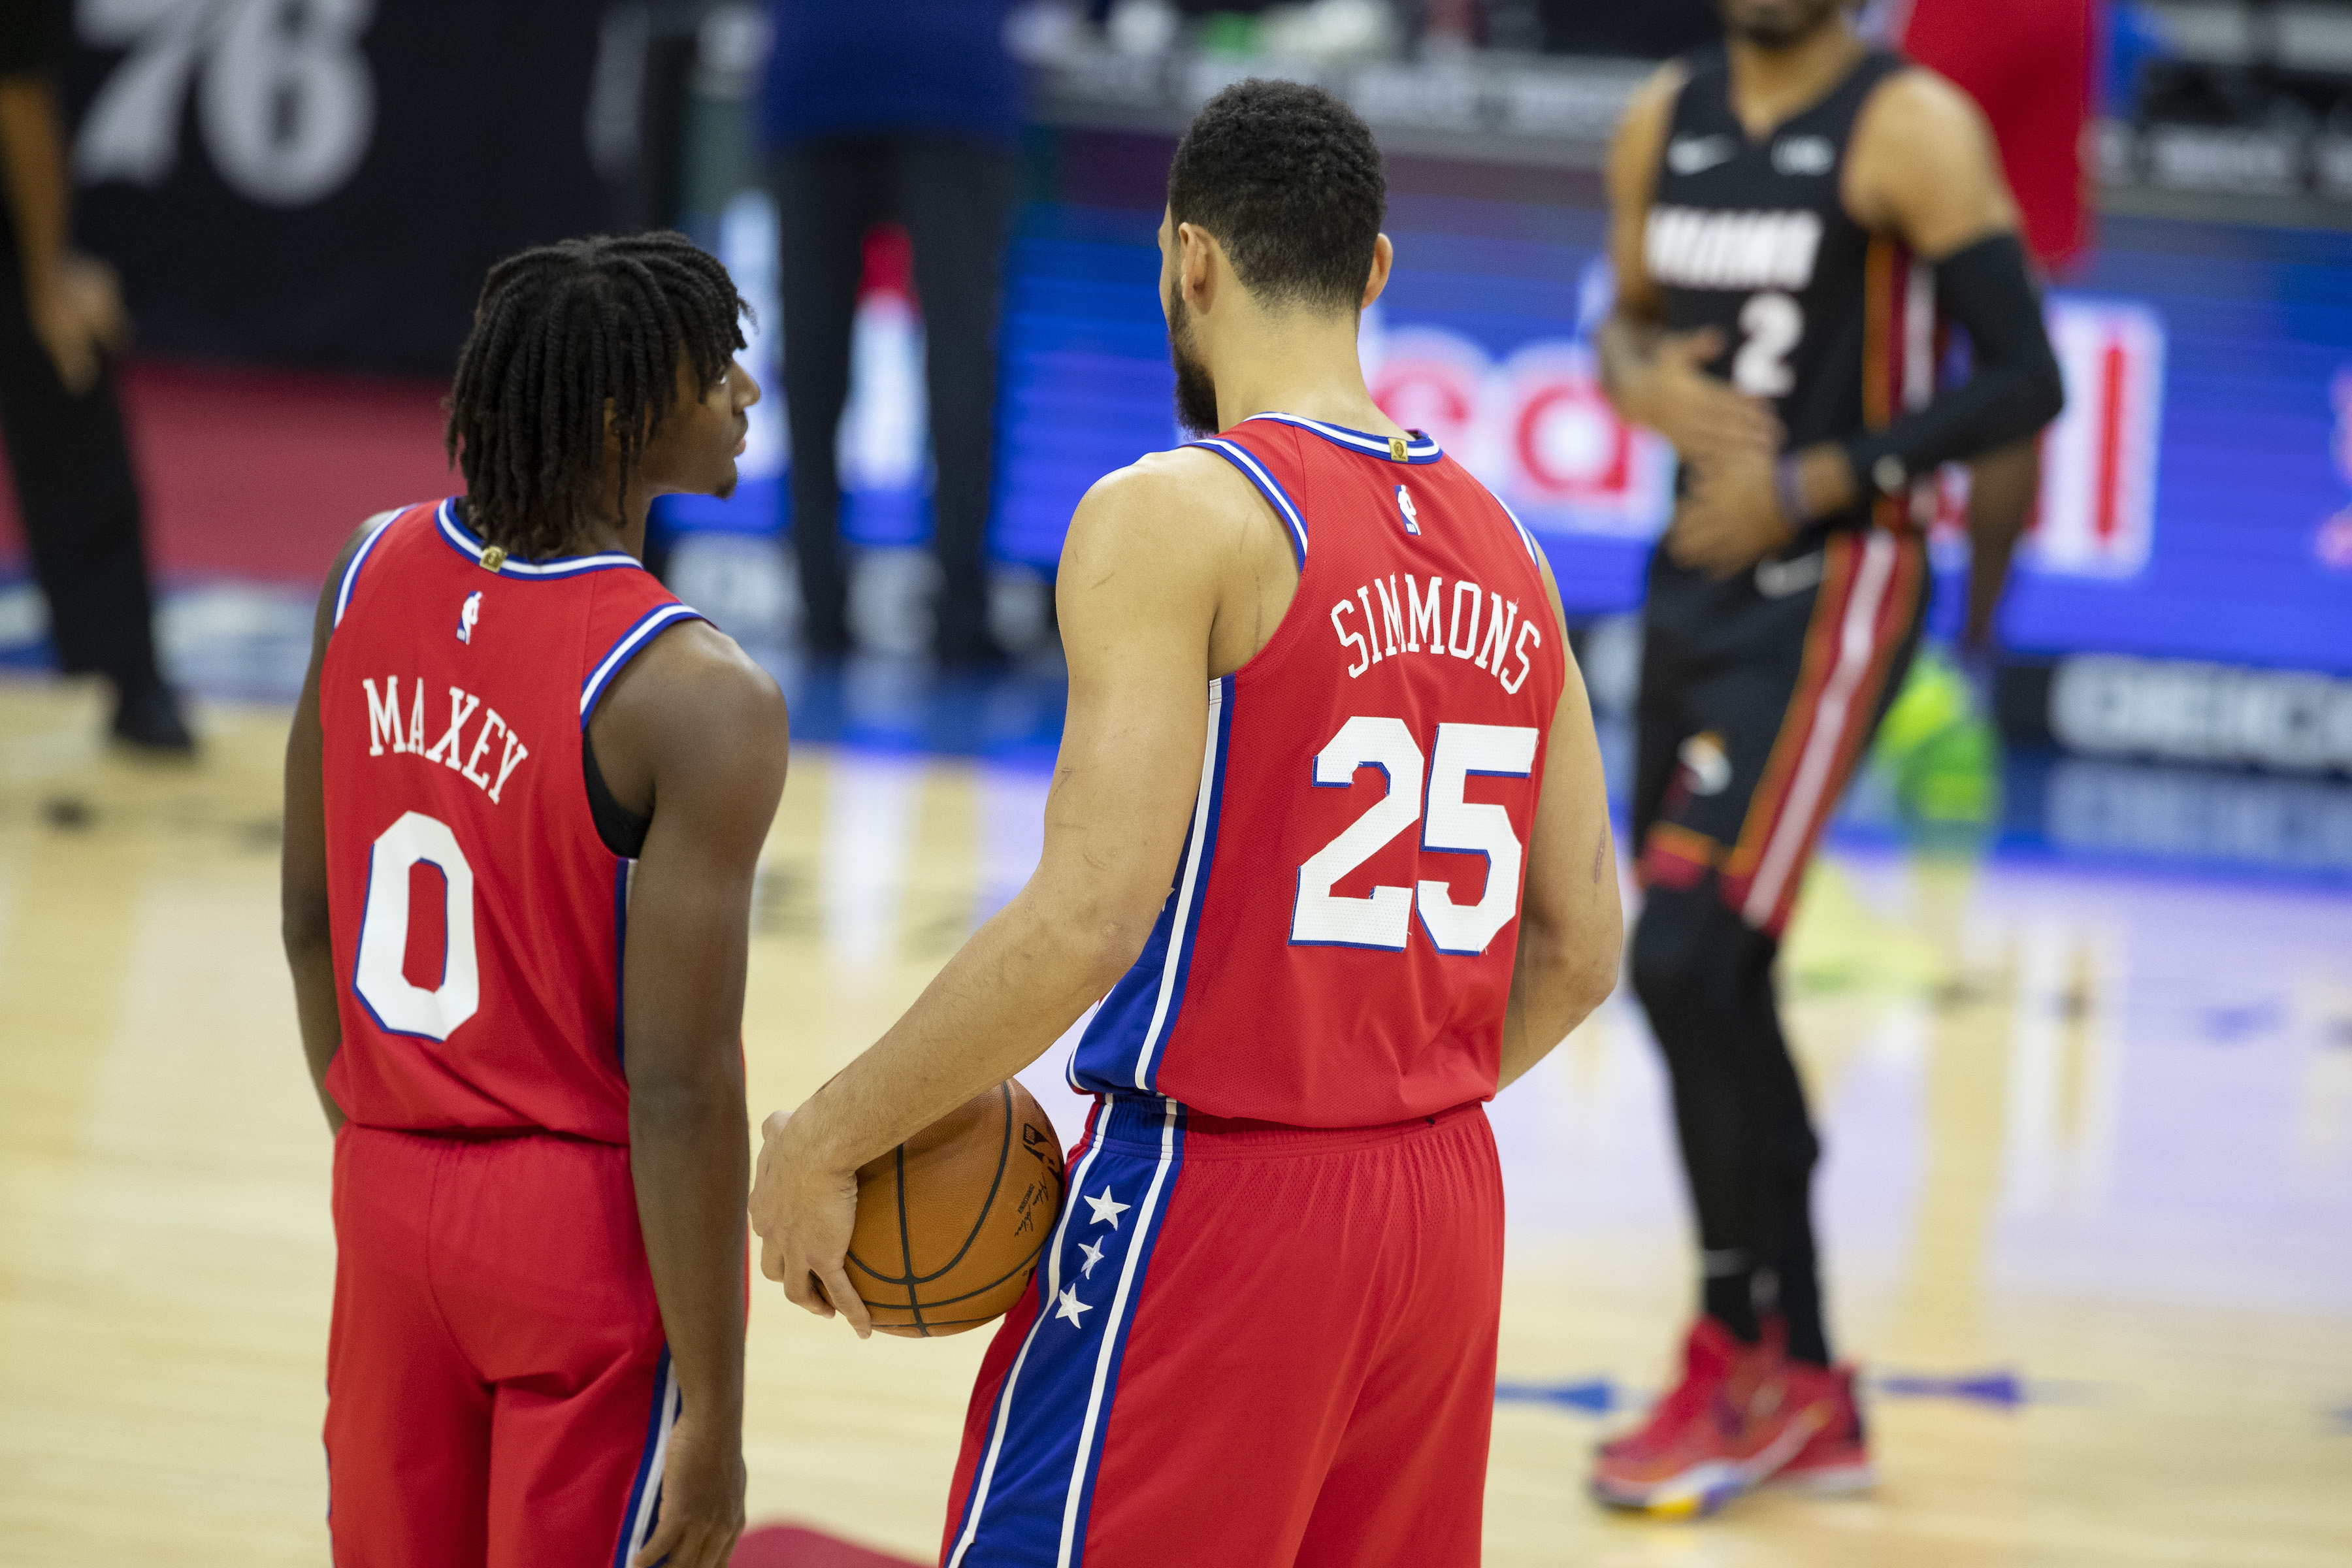 Philadelphia 76ers teammates Tyrese Maxey and Ben Simmons talk during a game in January 2021